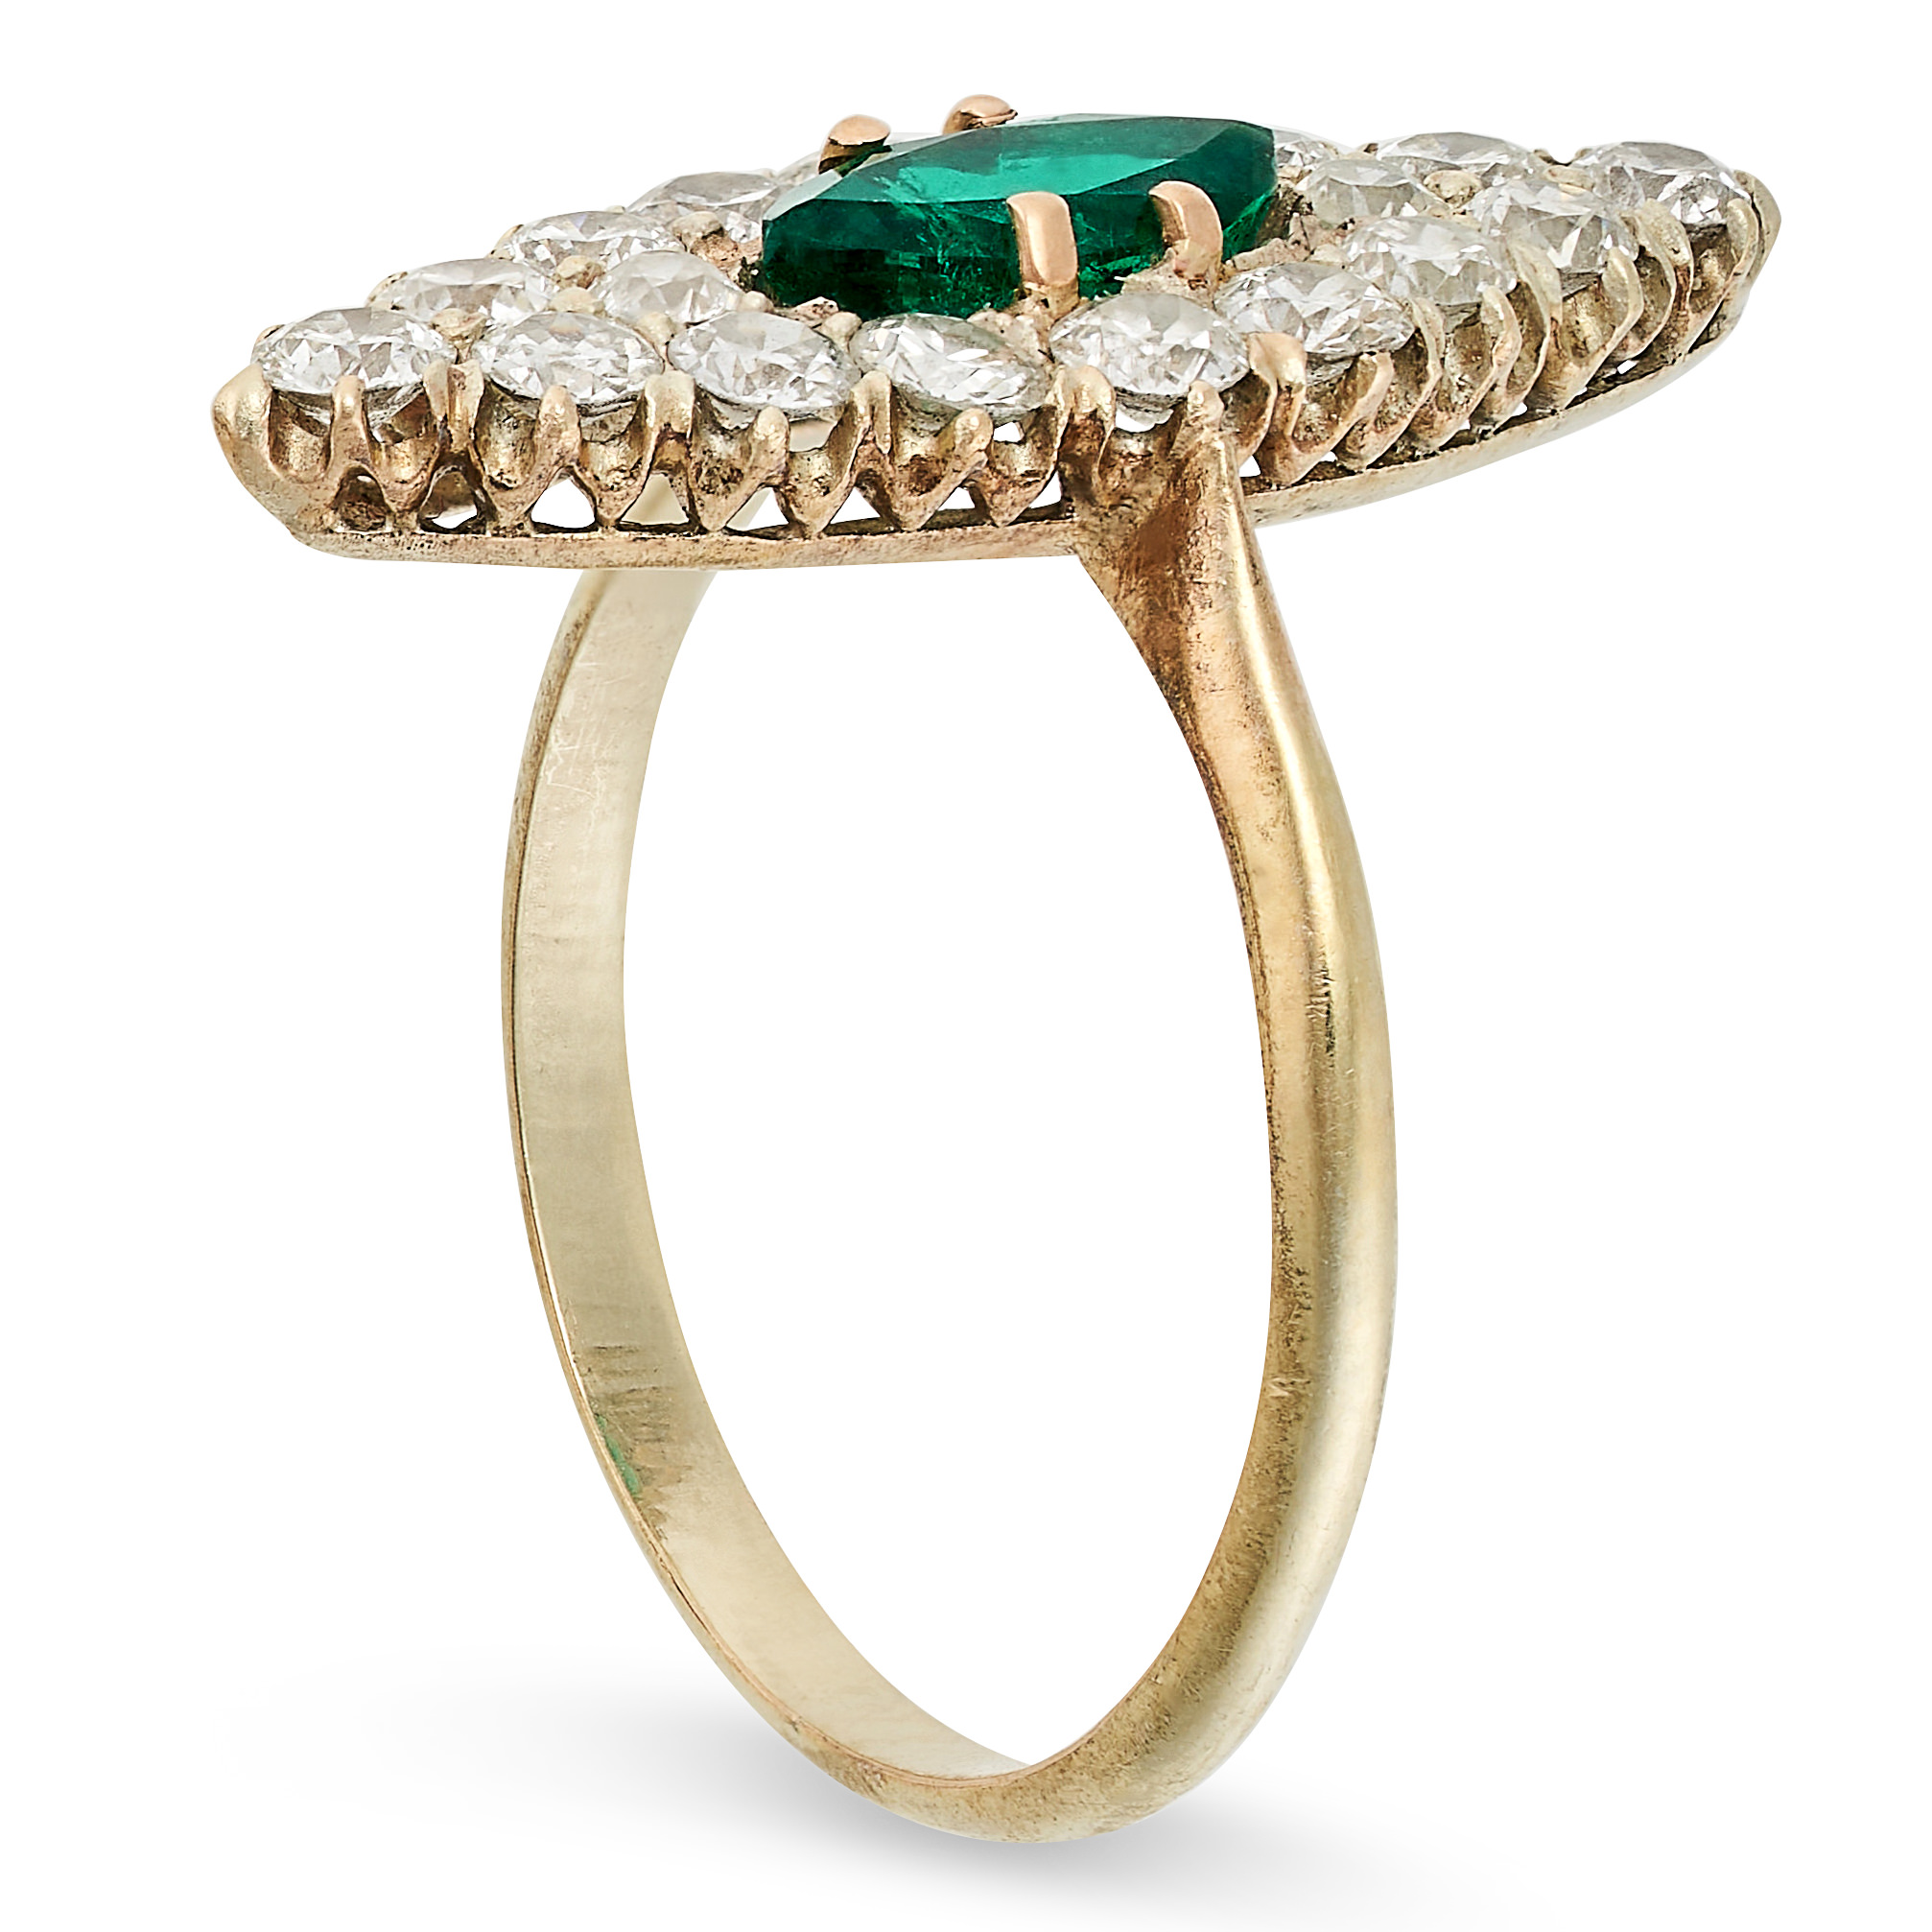 AN EMERALD AND DIAMOND MARQUISE RING in yellow gold, set with a marquise cut emerald, accented by - Image 2 of 2